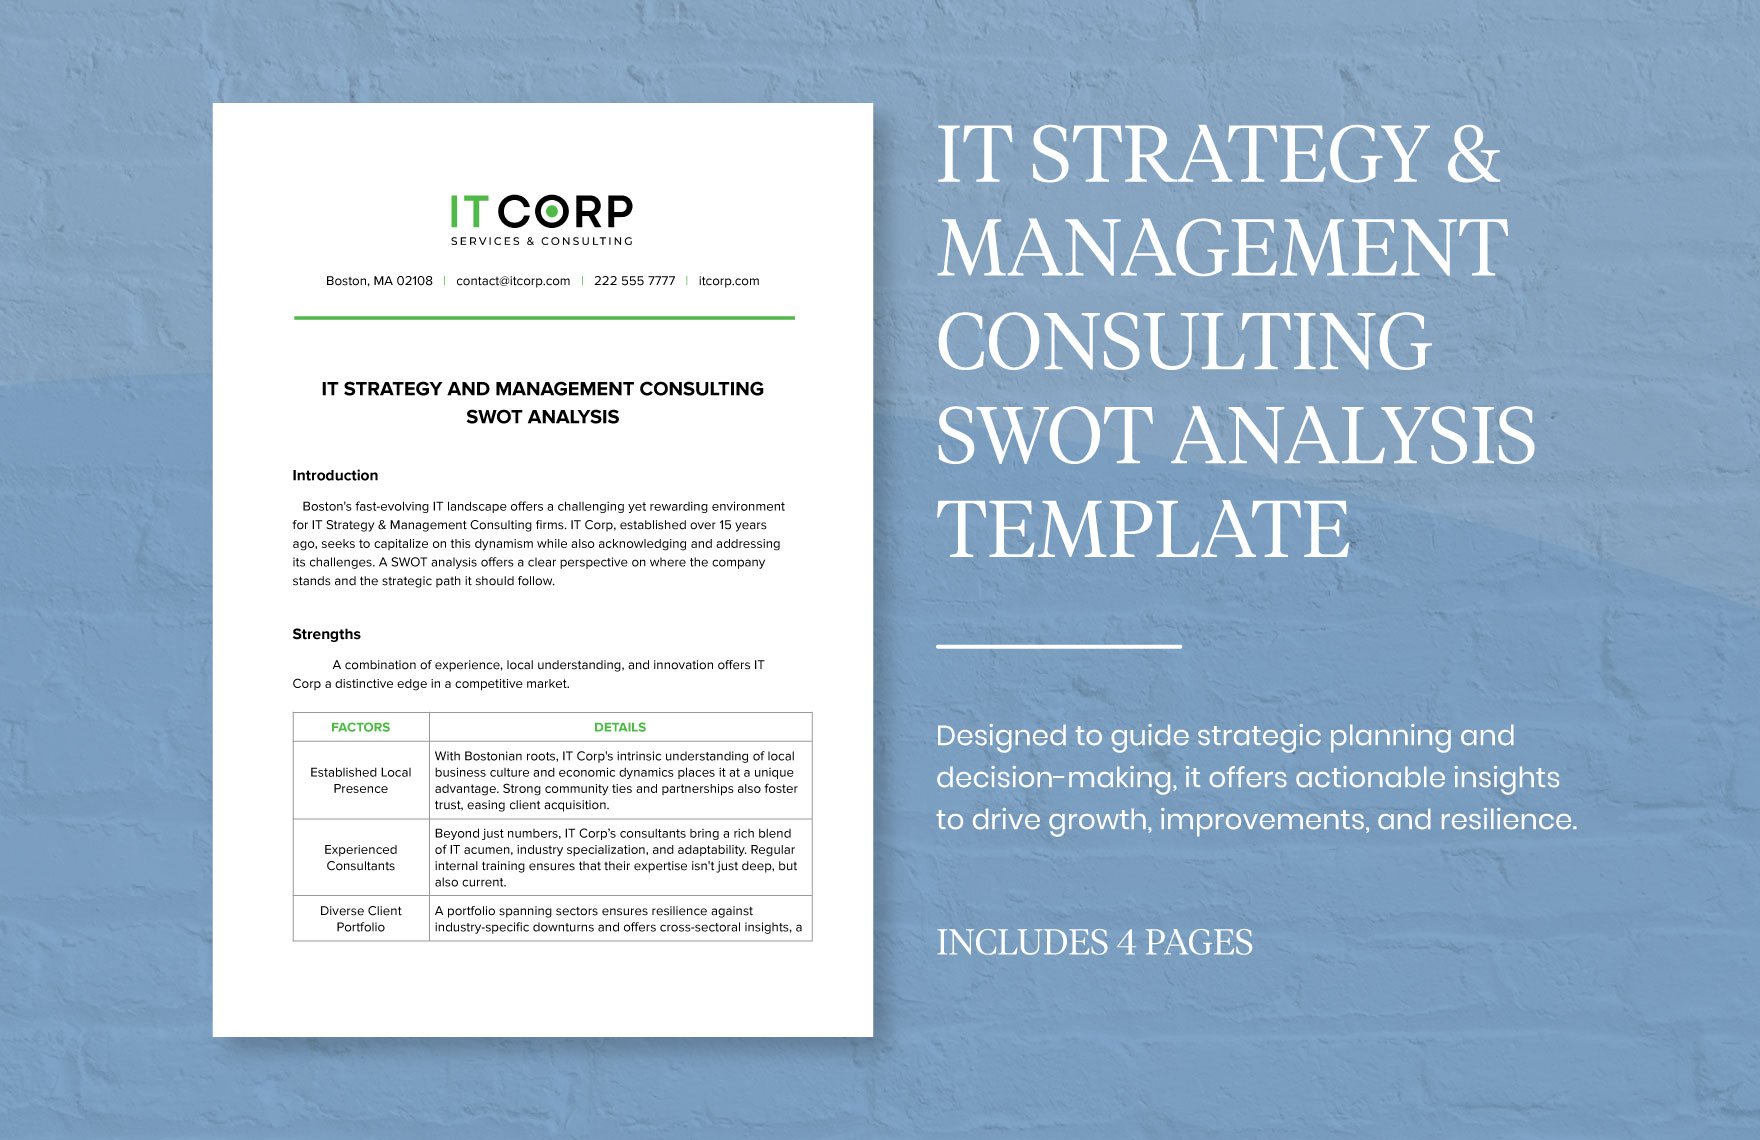 IT Strategy & Management Consulting SWOT Analysis Template